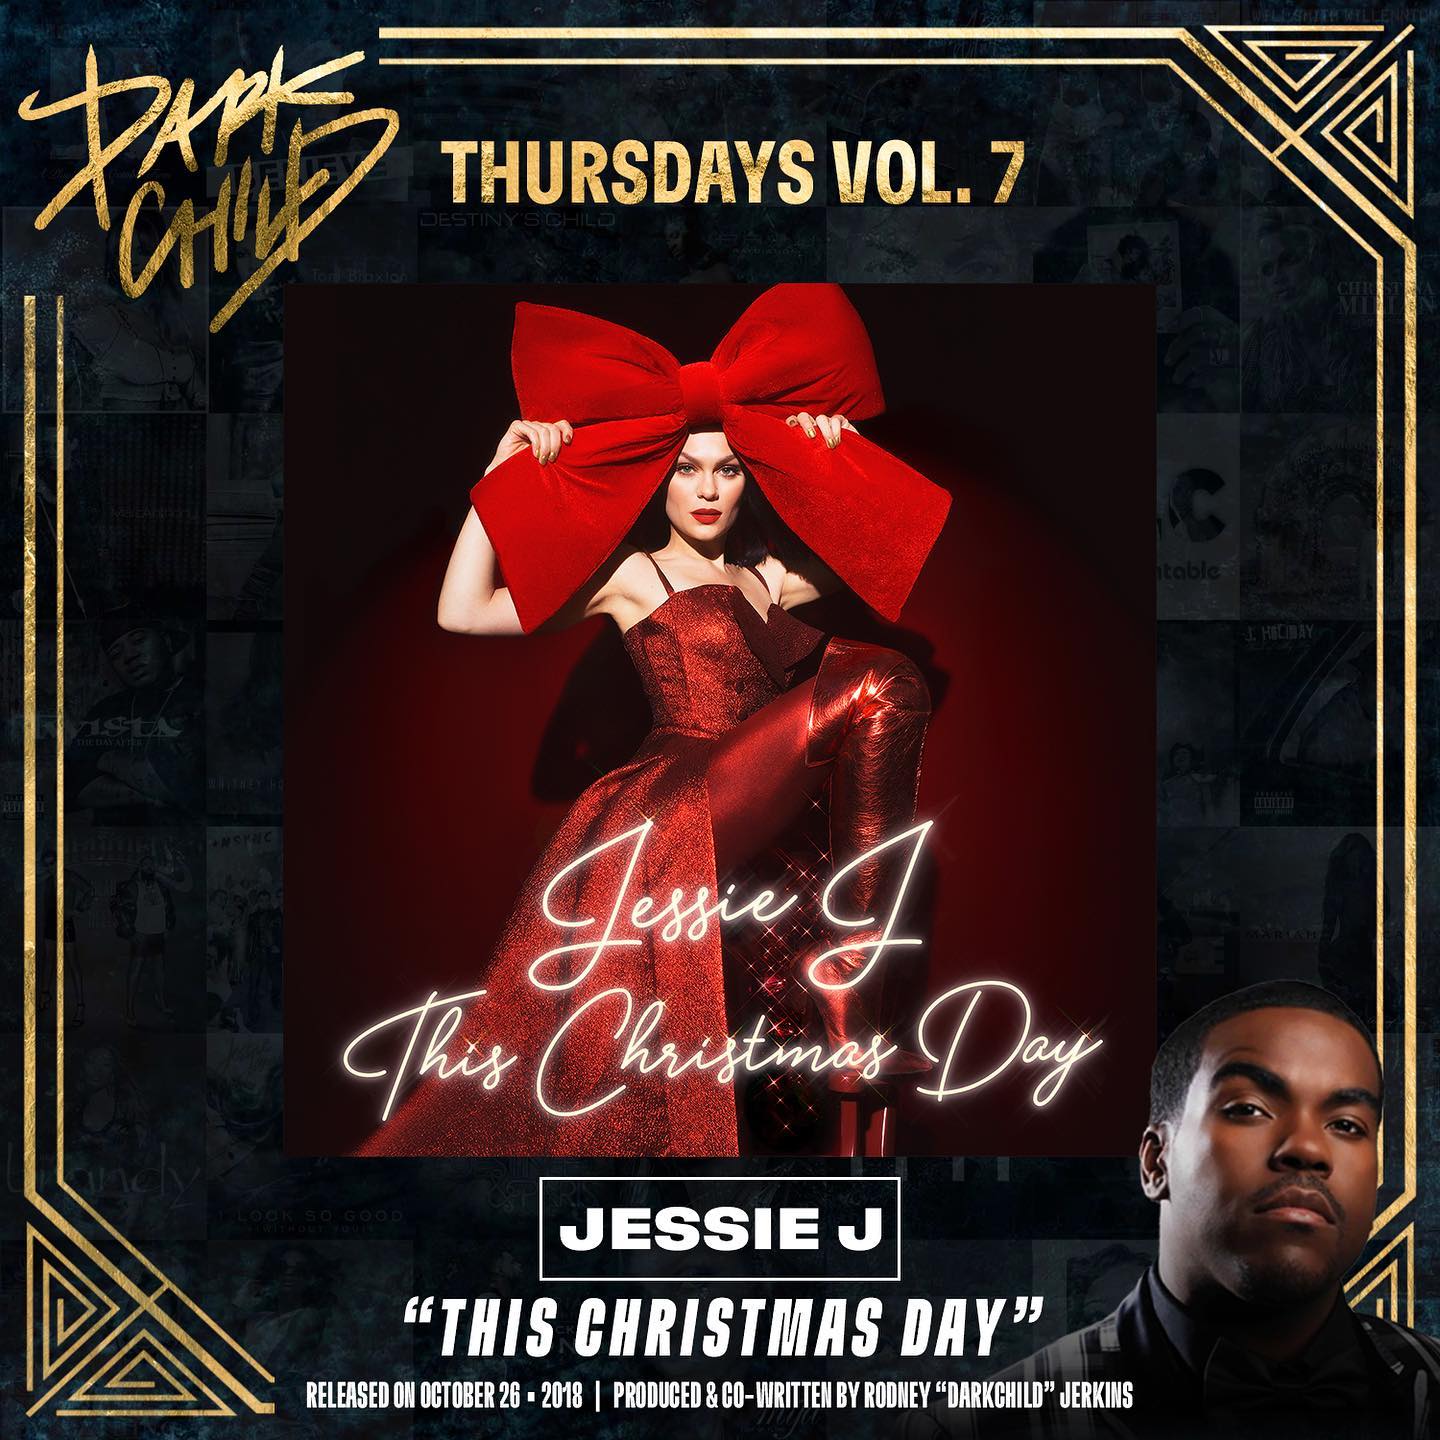 For this week’s #DarkchildThursdays I wanted to highlight “This Christmas Day” by the one and only @jessiej, a project and record that I had the privilege of working on in 2018 and has accumulated over 90 million streams. “This Christmas Day” is the only original song that we created together for this album. When we wrote this song, Jessie was going through some personal struggles. We tried to capture what this would sound like, but ultimately provide a sense of comfort that the listener could grasp onto for Christmas. With the timeless message & melody, I feel like we did just that.During the recording process I also had the opportunity to co-produce the covers of “Rockin' Around The Christmas Tree,” “Jingle Bell Rock,” and “White Christmas.” What song should we wrap up this year of #DarkchildThursdays with? In celebration of the I Wanna Dance With Somebody movie, I’m thinking @WhitneyHouston What do u think? #DARKCHILD #DARKCHILDTHURSDAYS